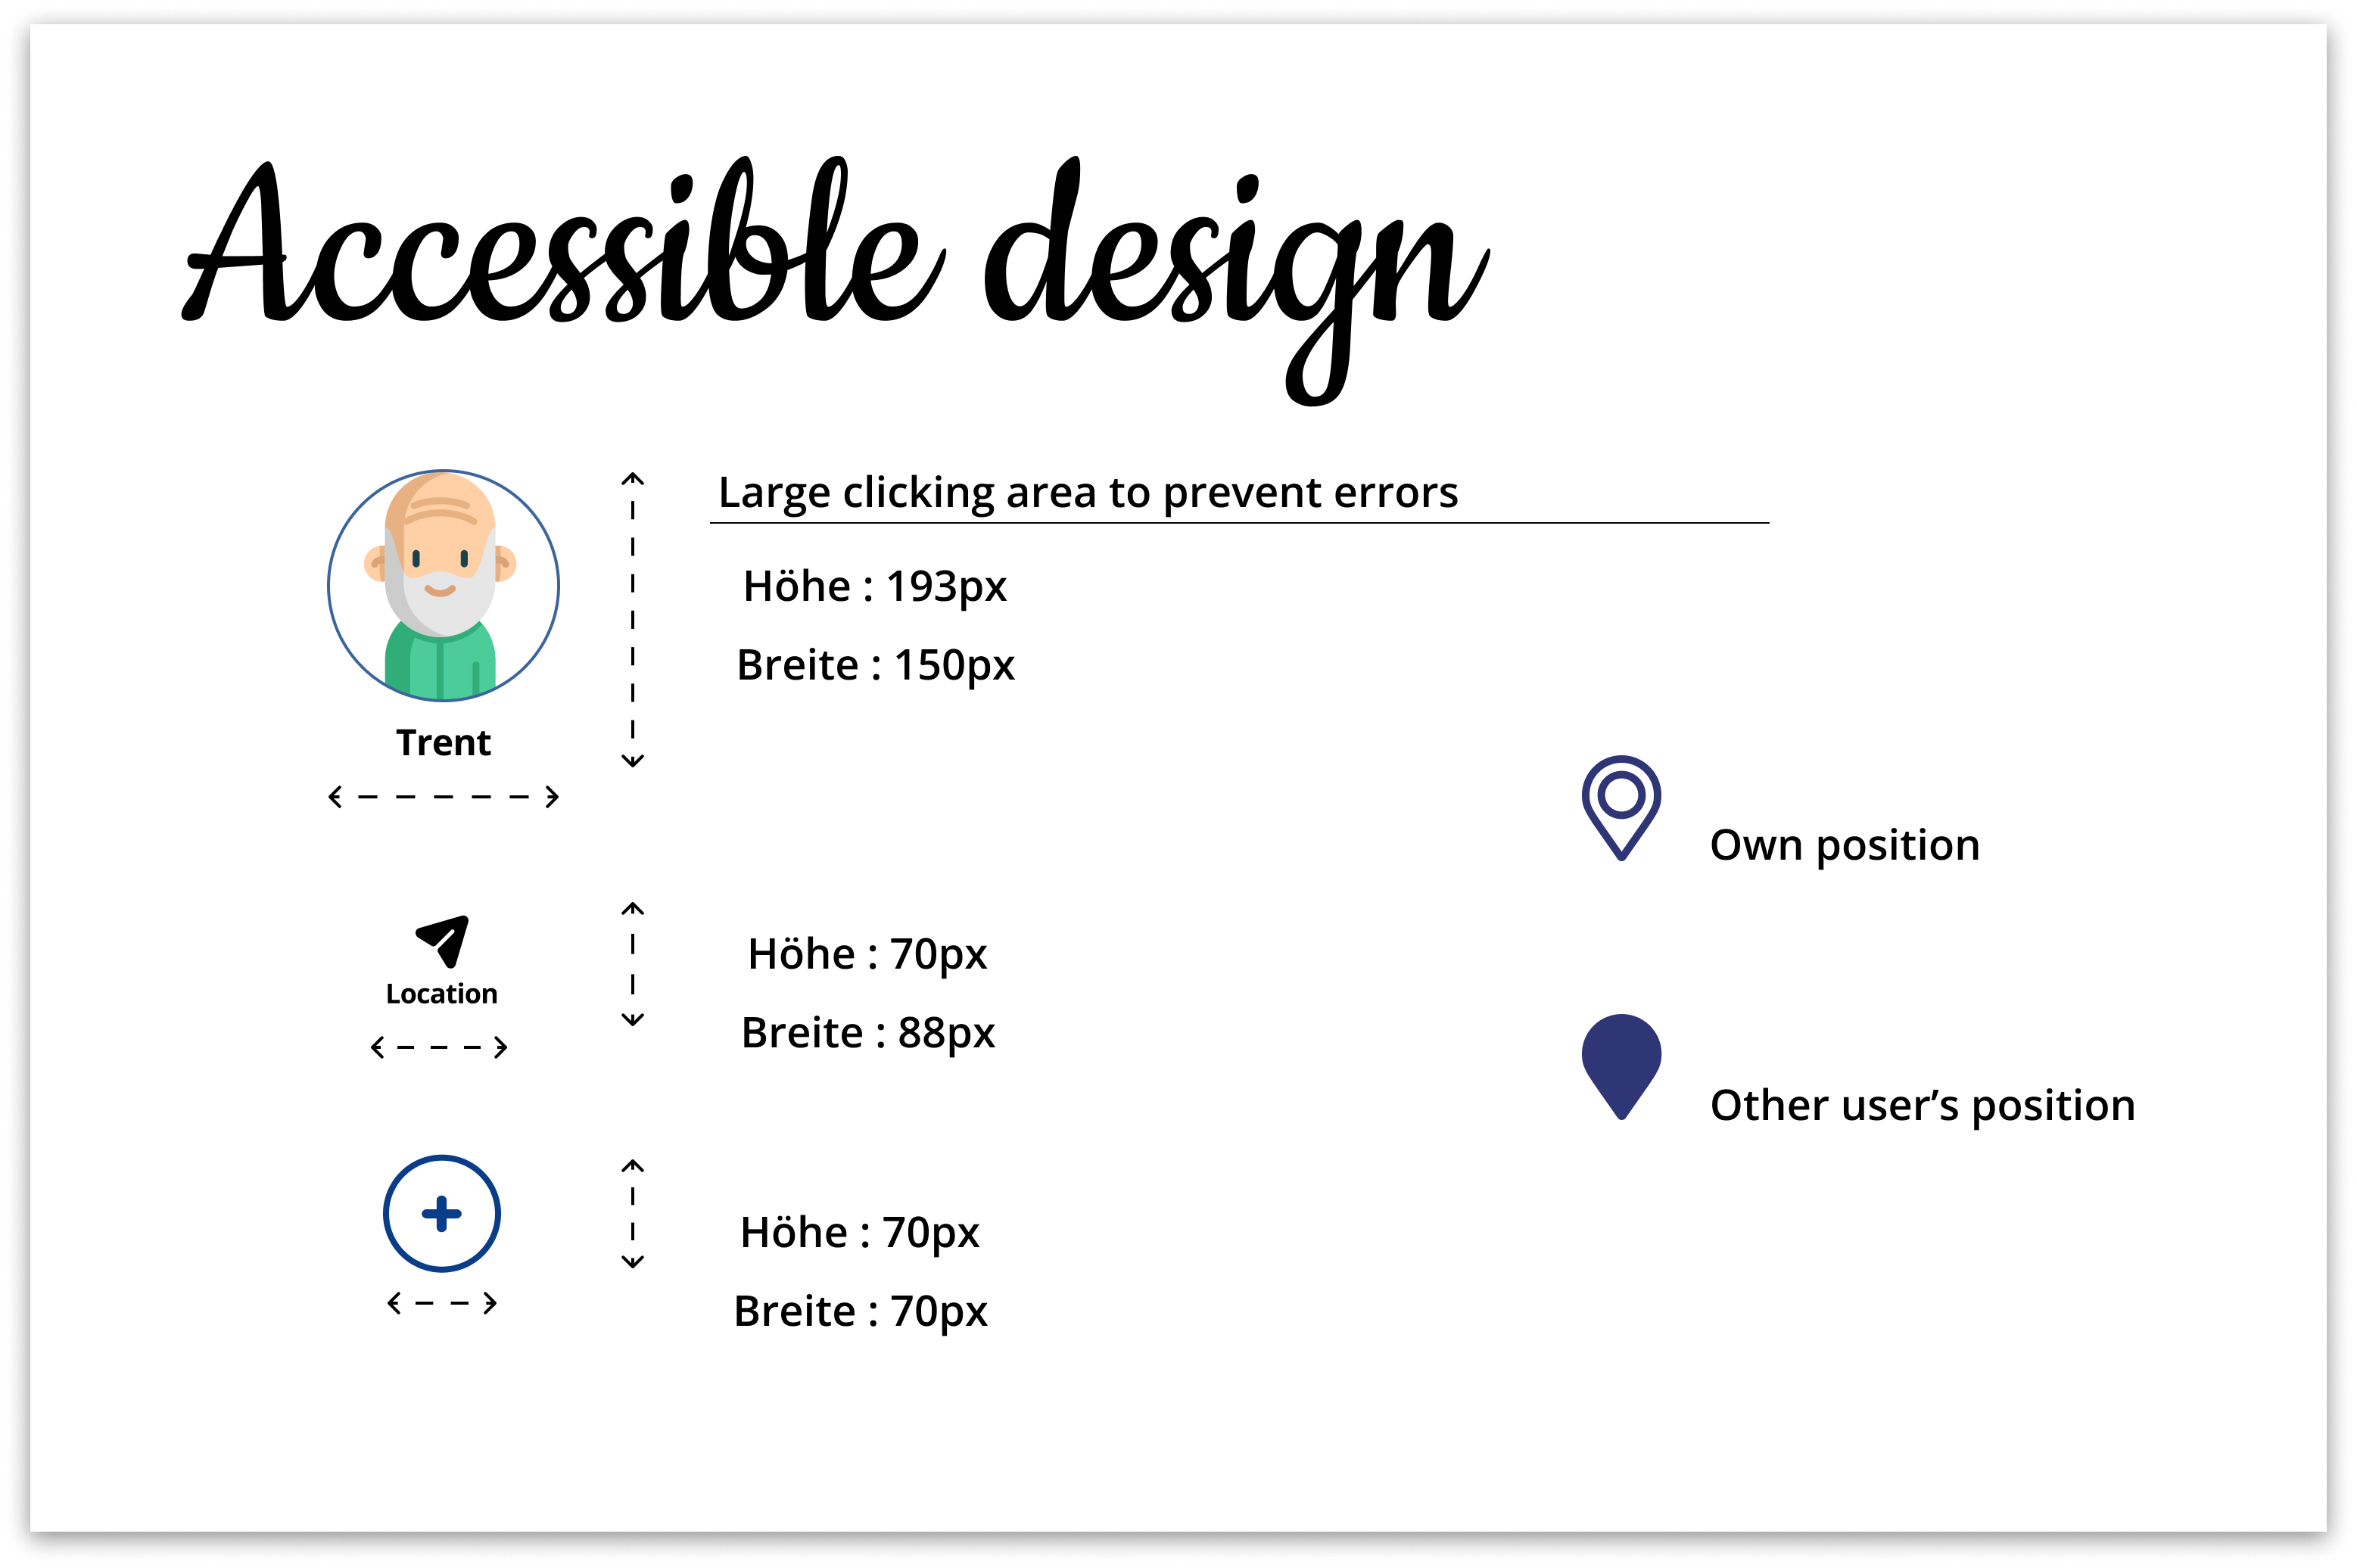 Explanation of accessible design regarding width and height of interaction buttons